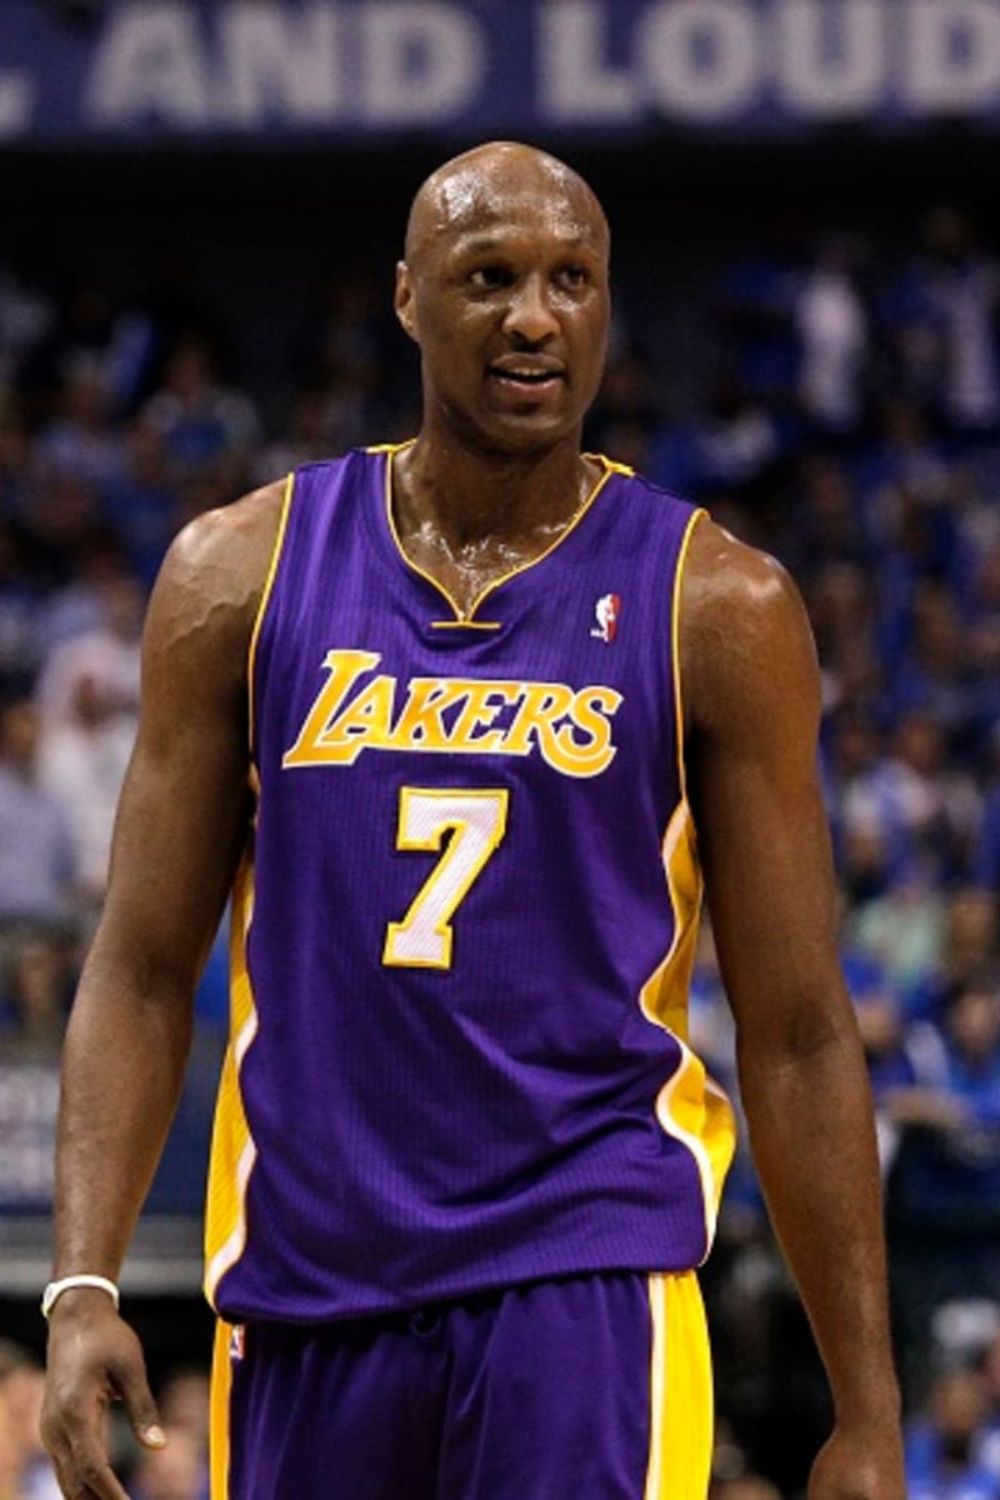 Lamar Odom For The Lakers (Source: Sports Illustrated)